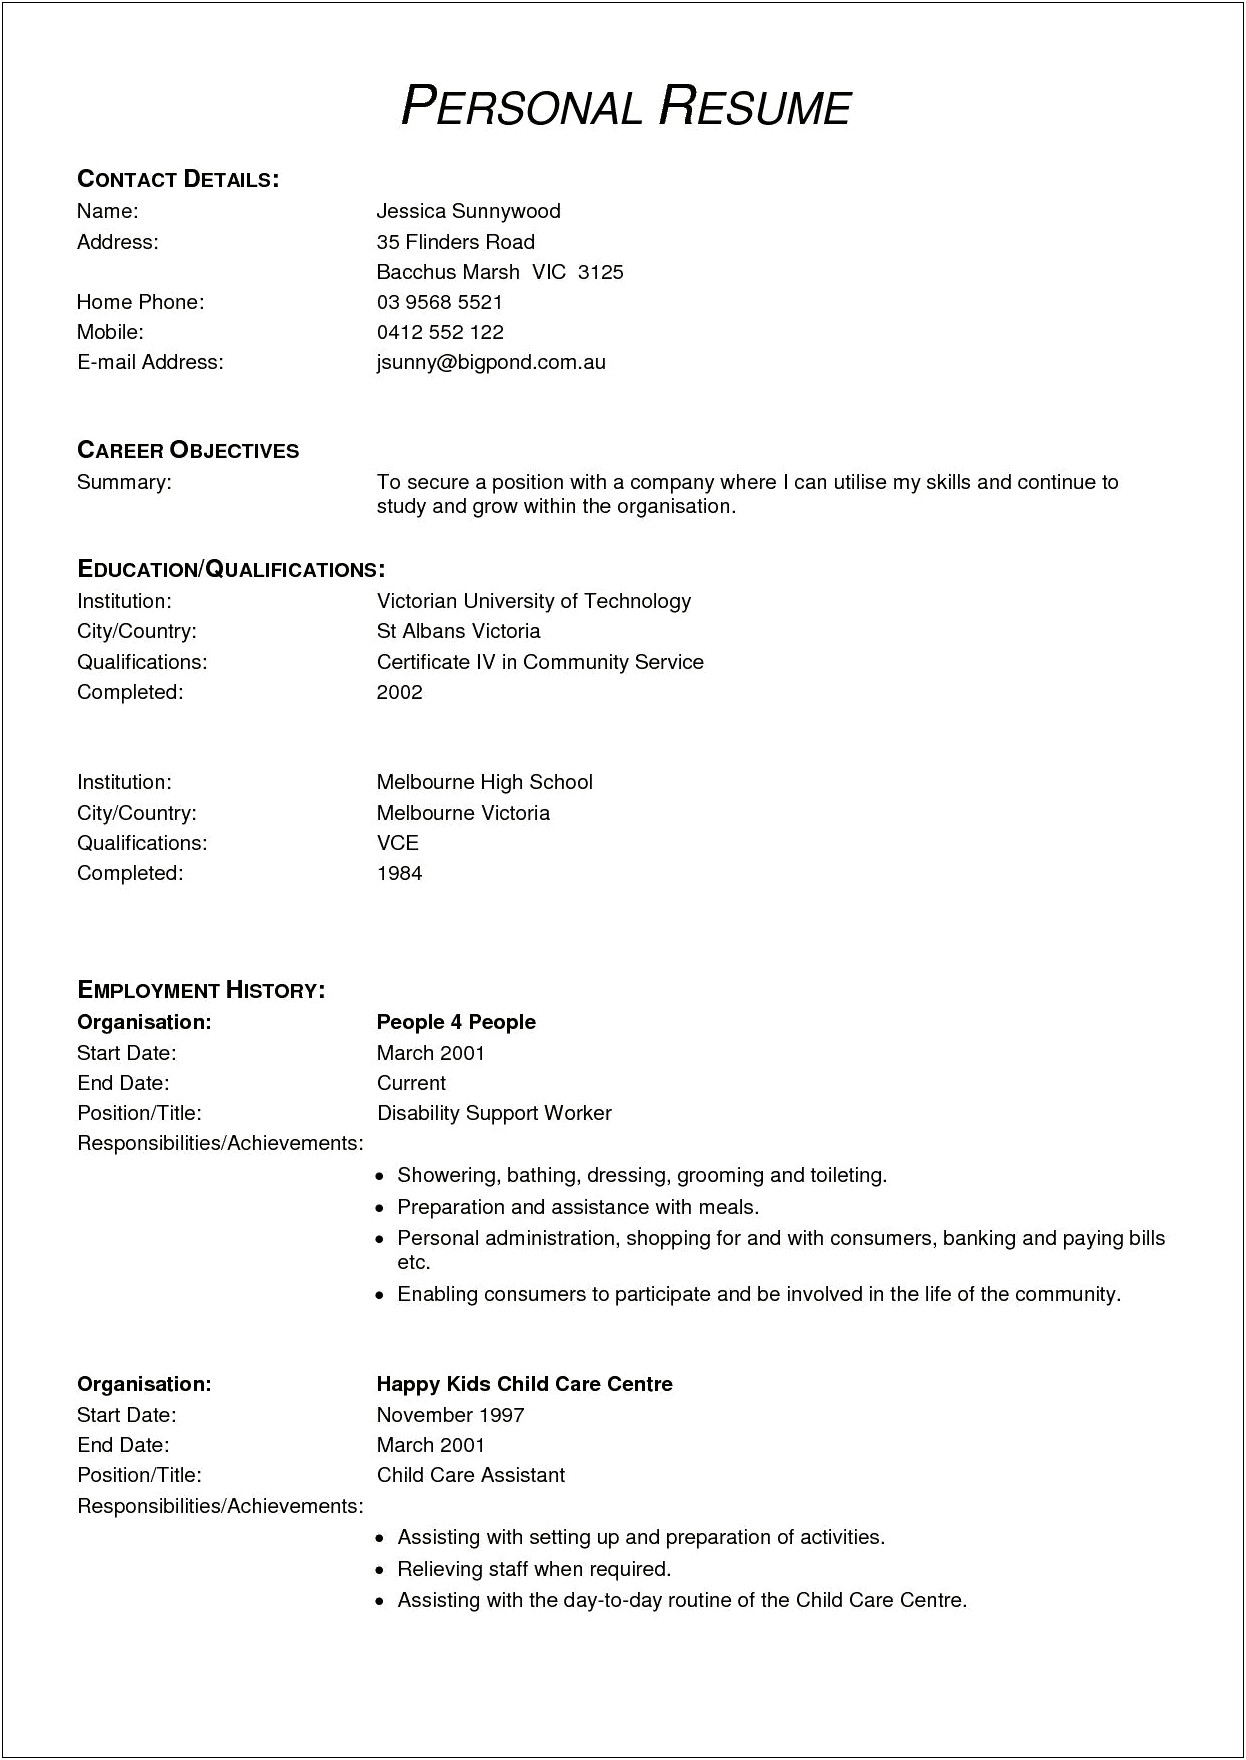 Resumes Of People Looking For Receptionist Work